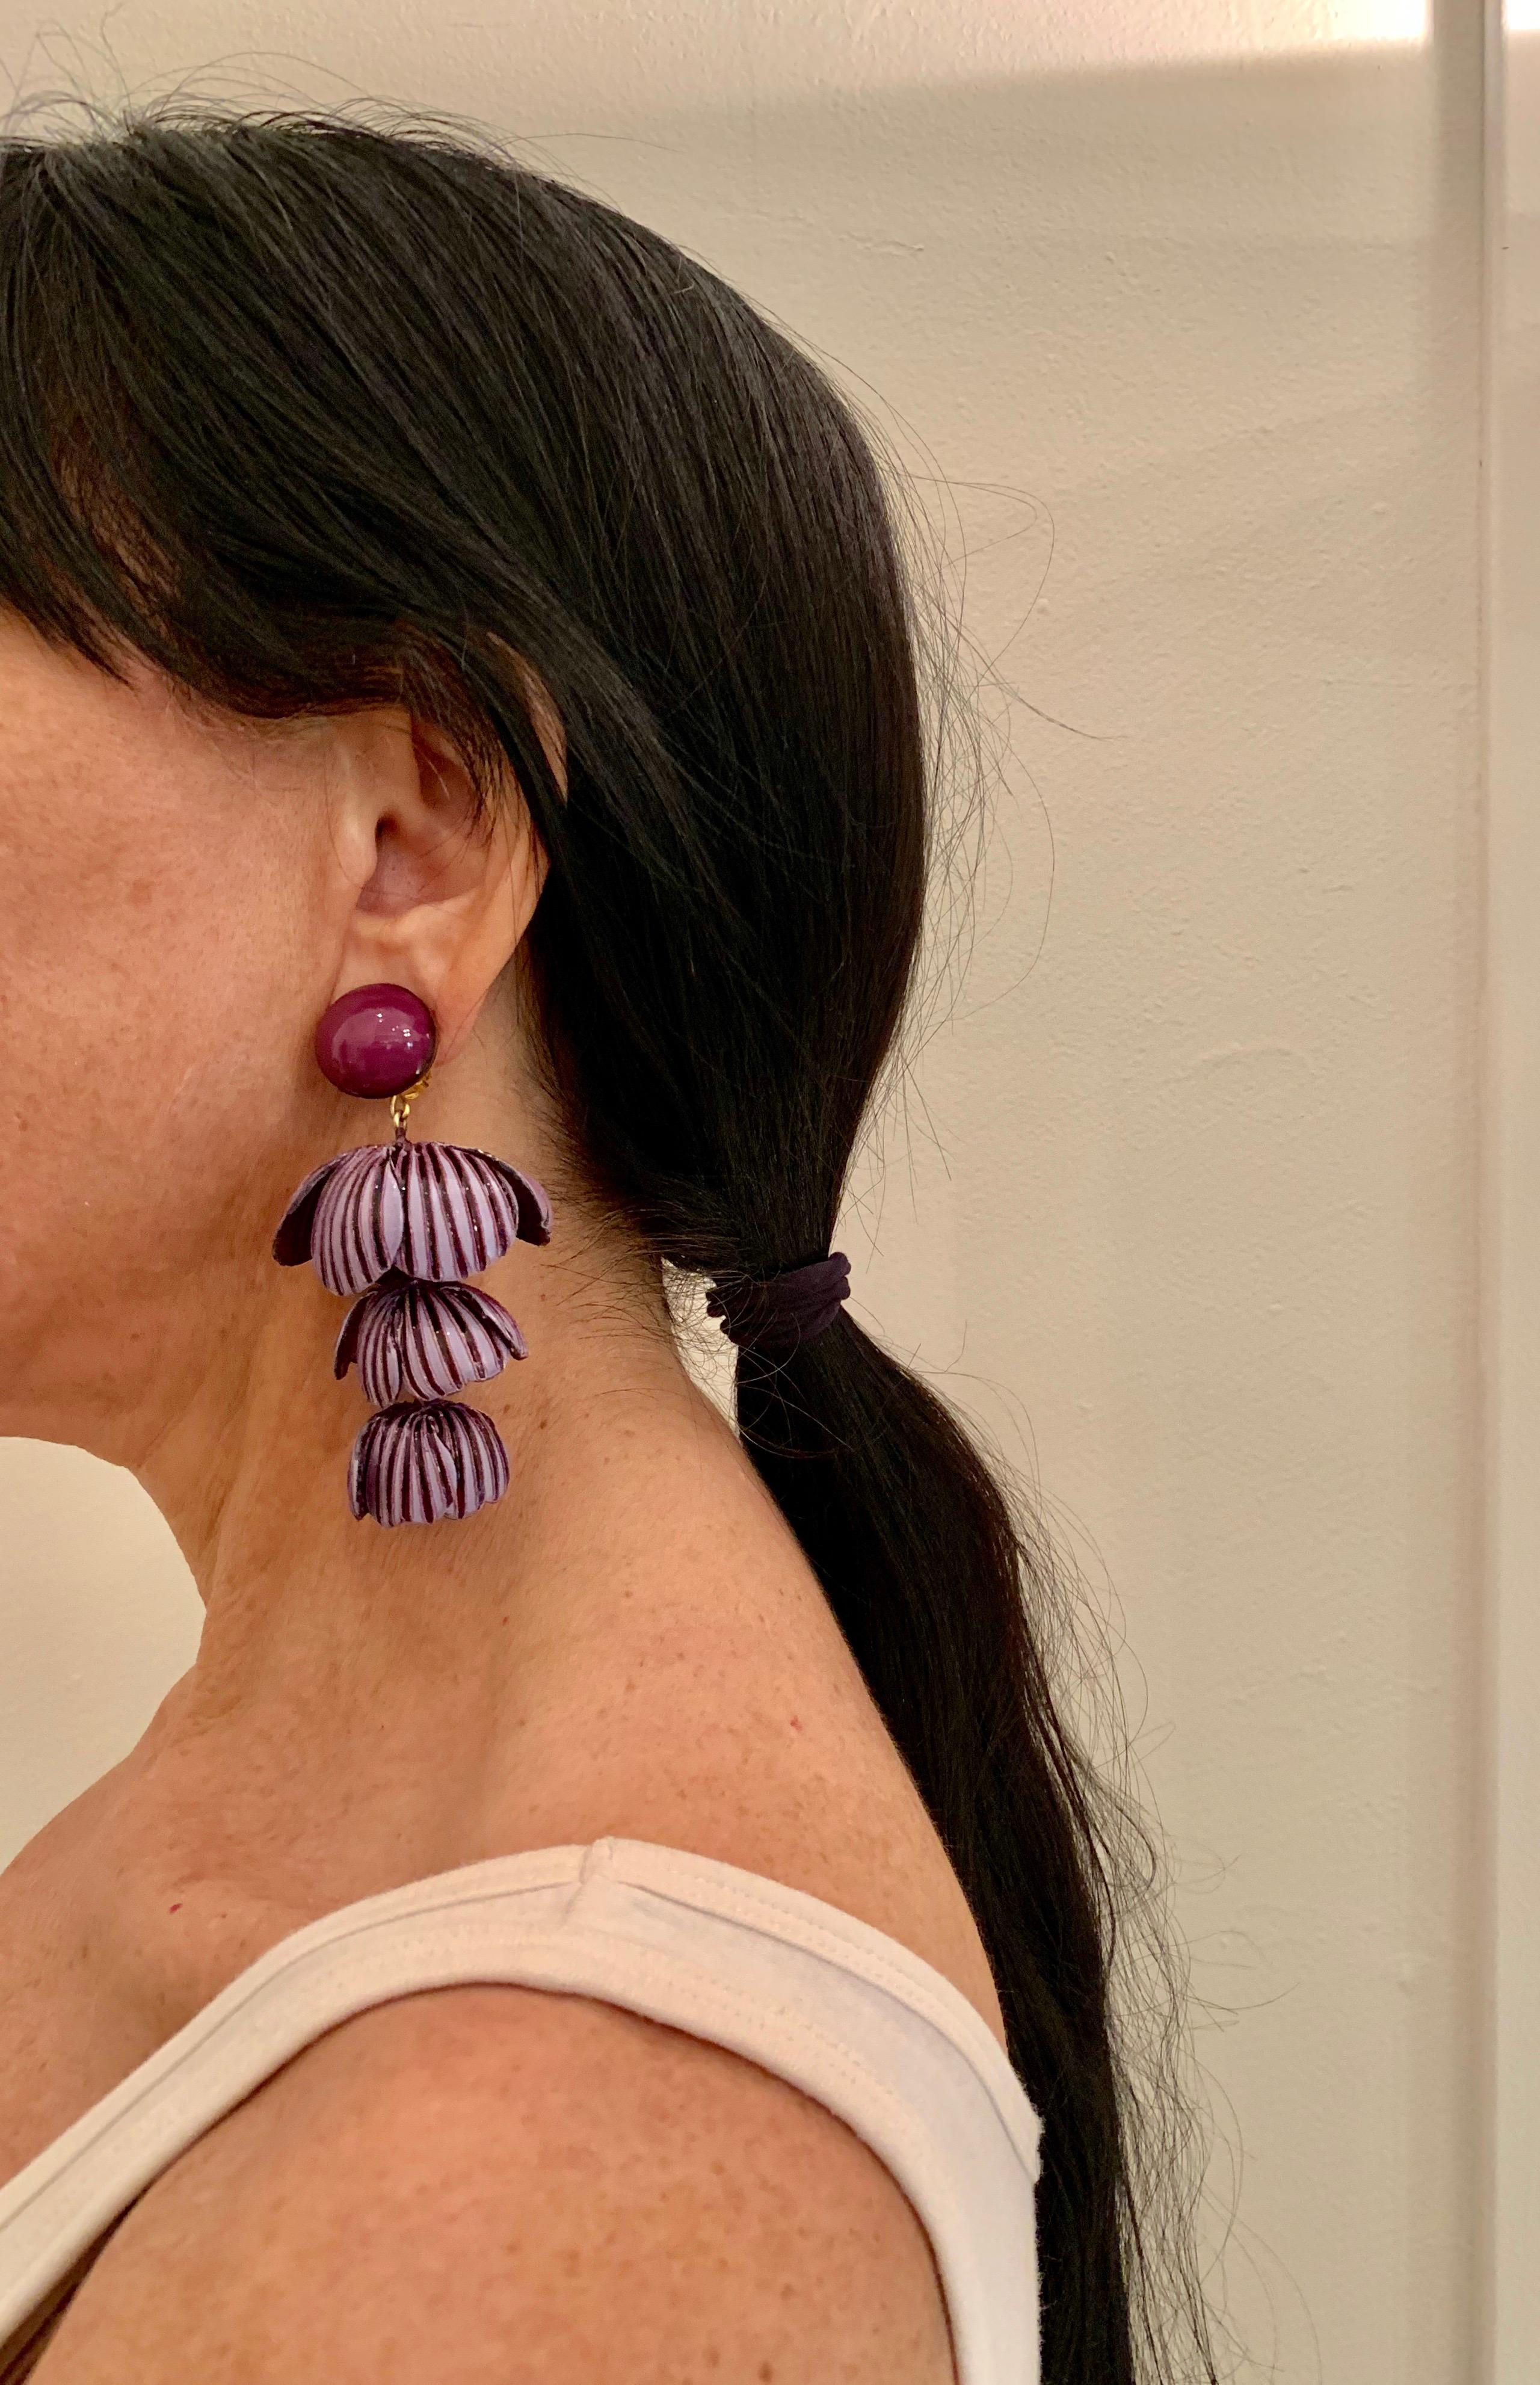 Light and easy to wear, these handmade artisanal contemporary clip-on earrings were made in Paris by Cilea. The lightweight statement earrings feature three rows of architectural enameline (enamel and resin composite) purple flower petals. The